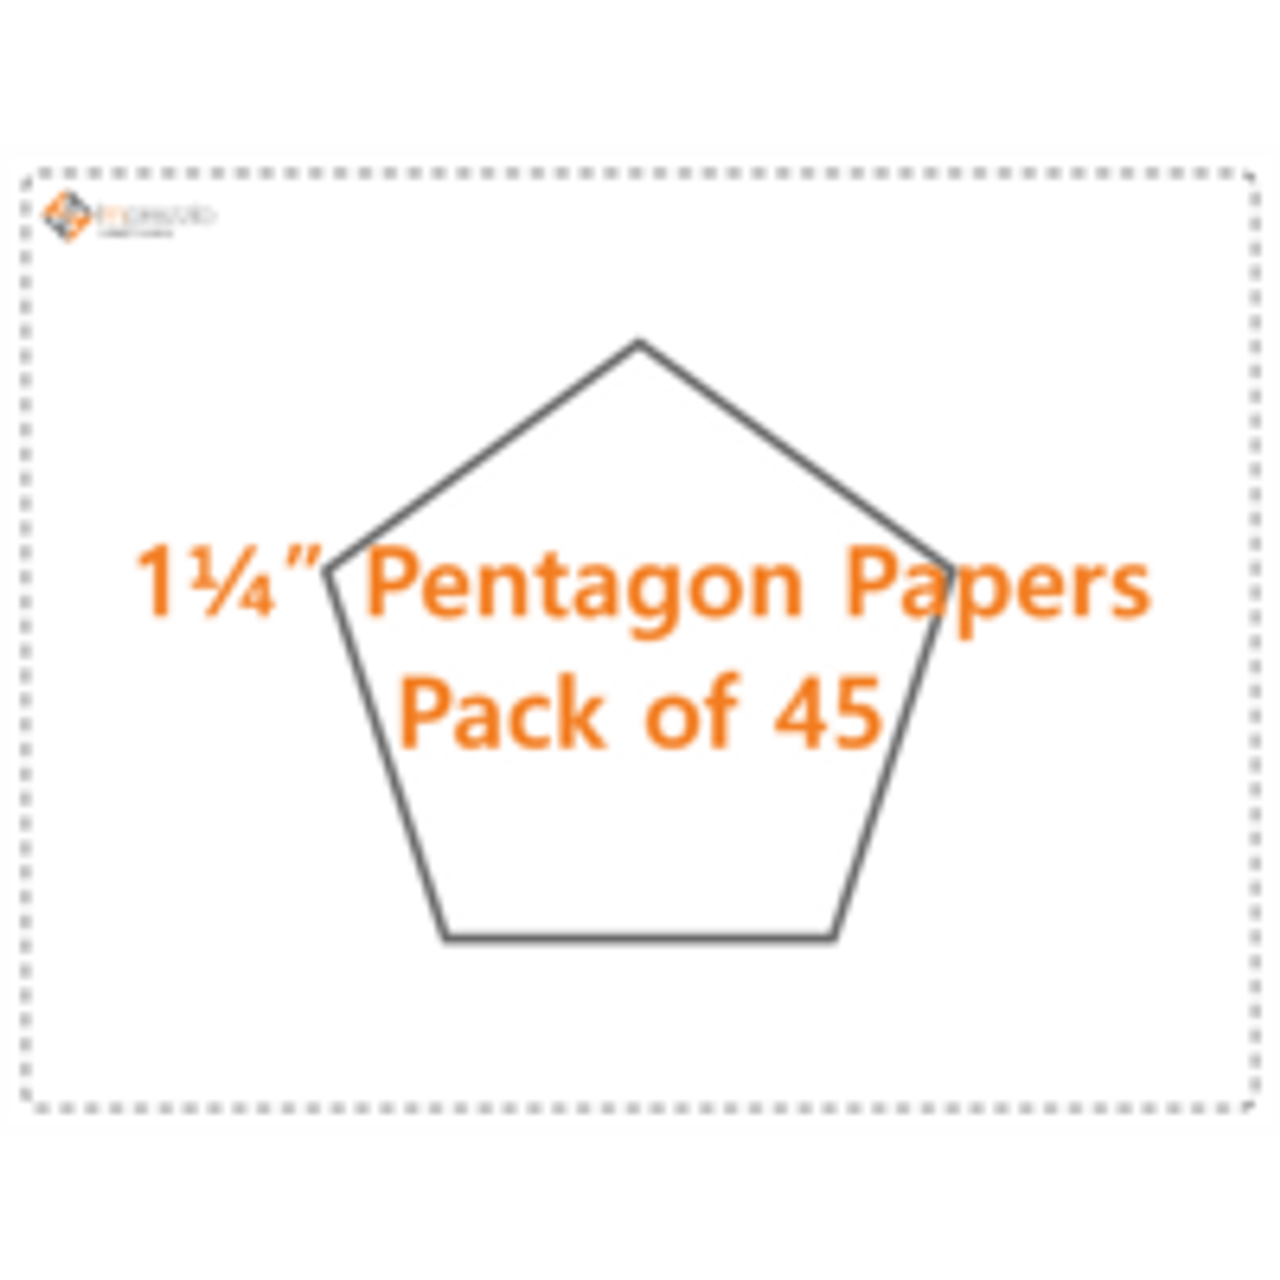 1 1/4" Pentagon Papers - Pack of 45